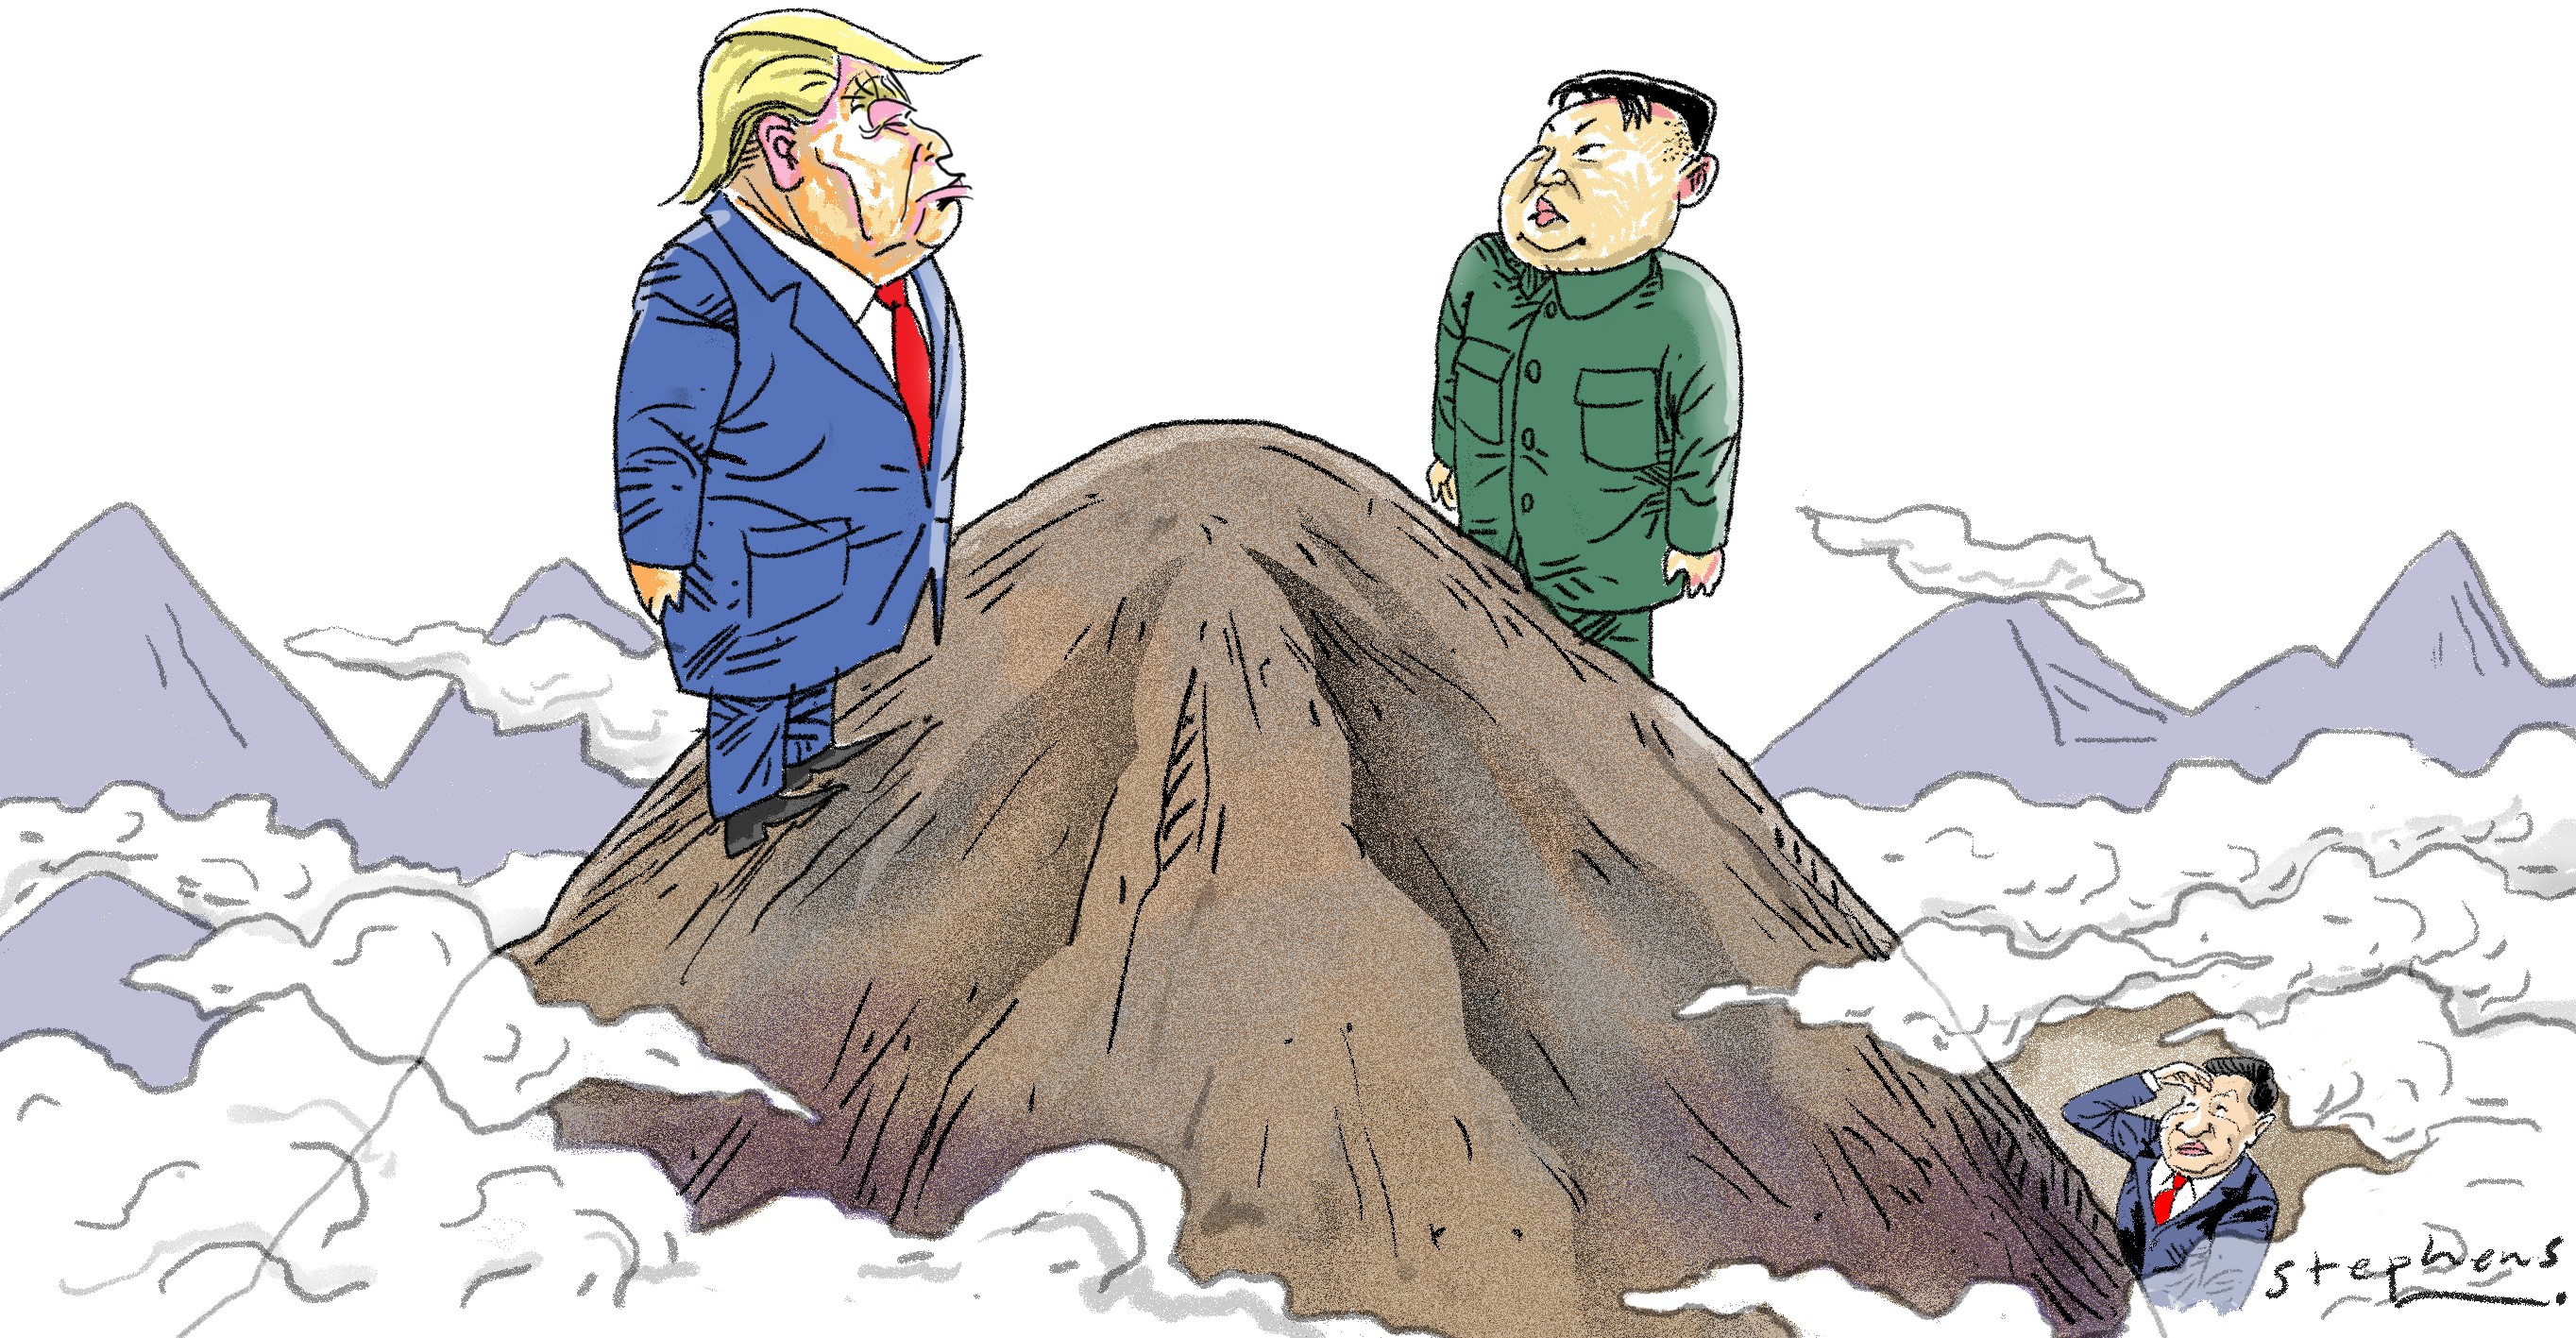 After Donald Trump seized the opportunity for direct talks with Kim Jong-un, the Chinese leadership cannot but hope for a successful outcome, knowing it will be its biggest strategic loser. Illustration: Craig Stephens